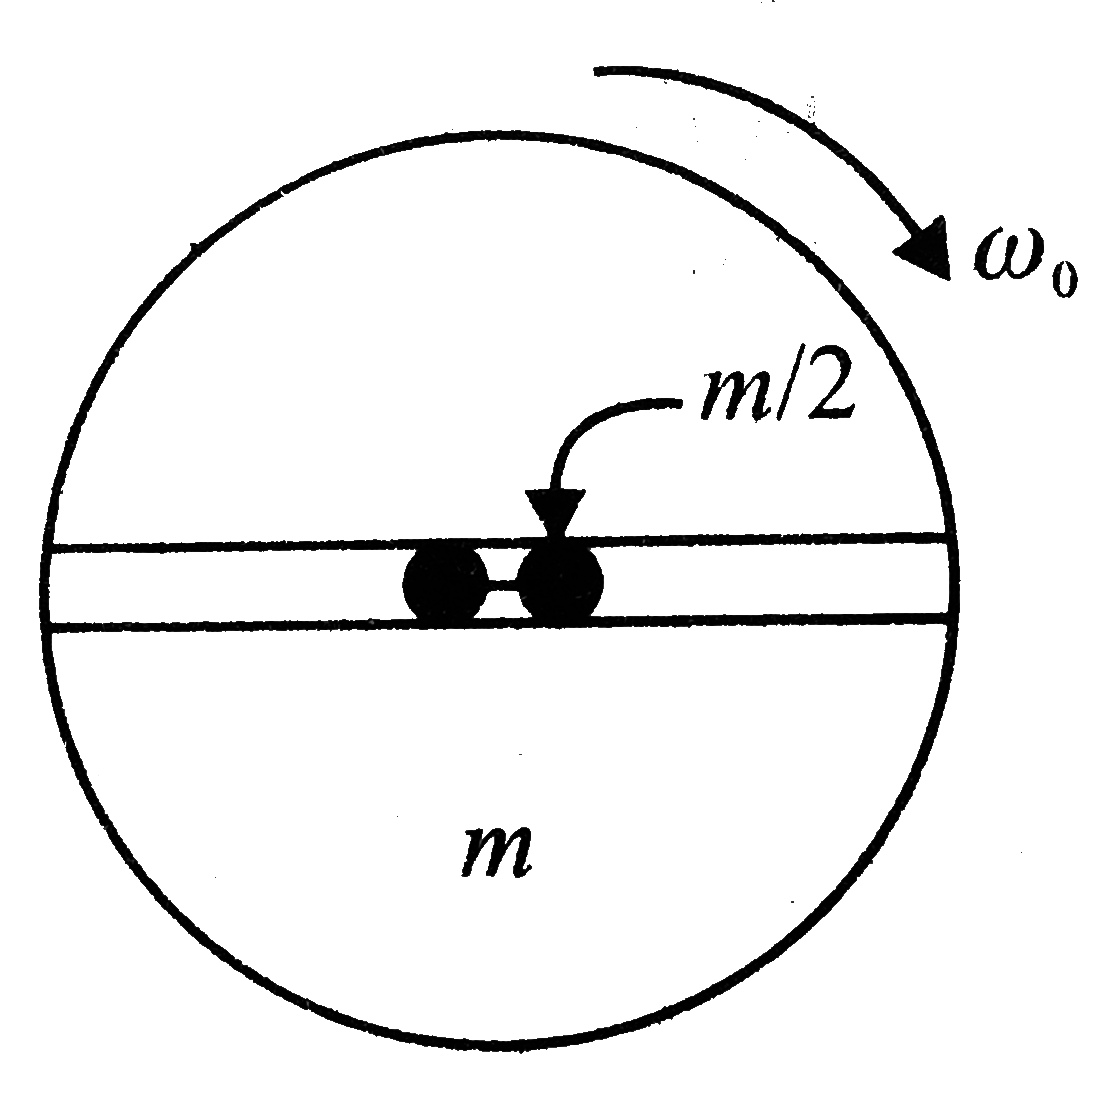 A disc of mass m and radius R is free to rotate in a horizontal plane about a vertical smooth fixed axis passing through its centre. There is a smooth groove along the diameter of the disc and two small balls of mass m//2 each are placed in it on either side of the centre of the disc as shown in Fig. The disc is given an initial angular velocity omega(0) and released.       The net work done by forces exerted by the disc on the ball for the duration ball remains on the disc is